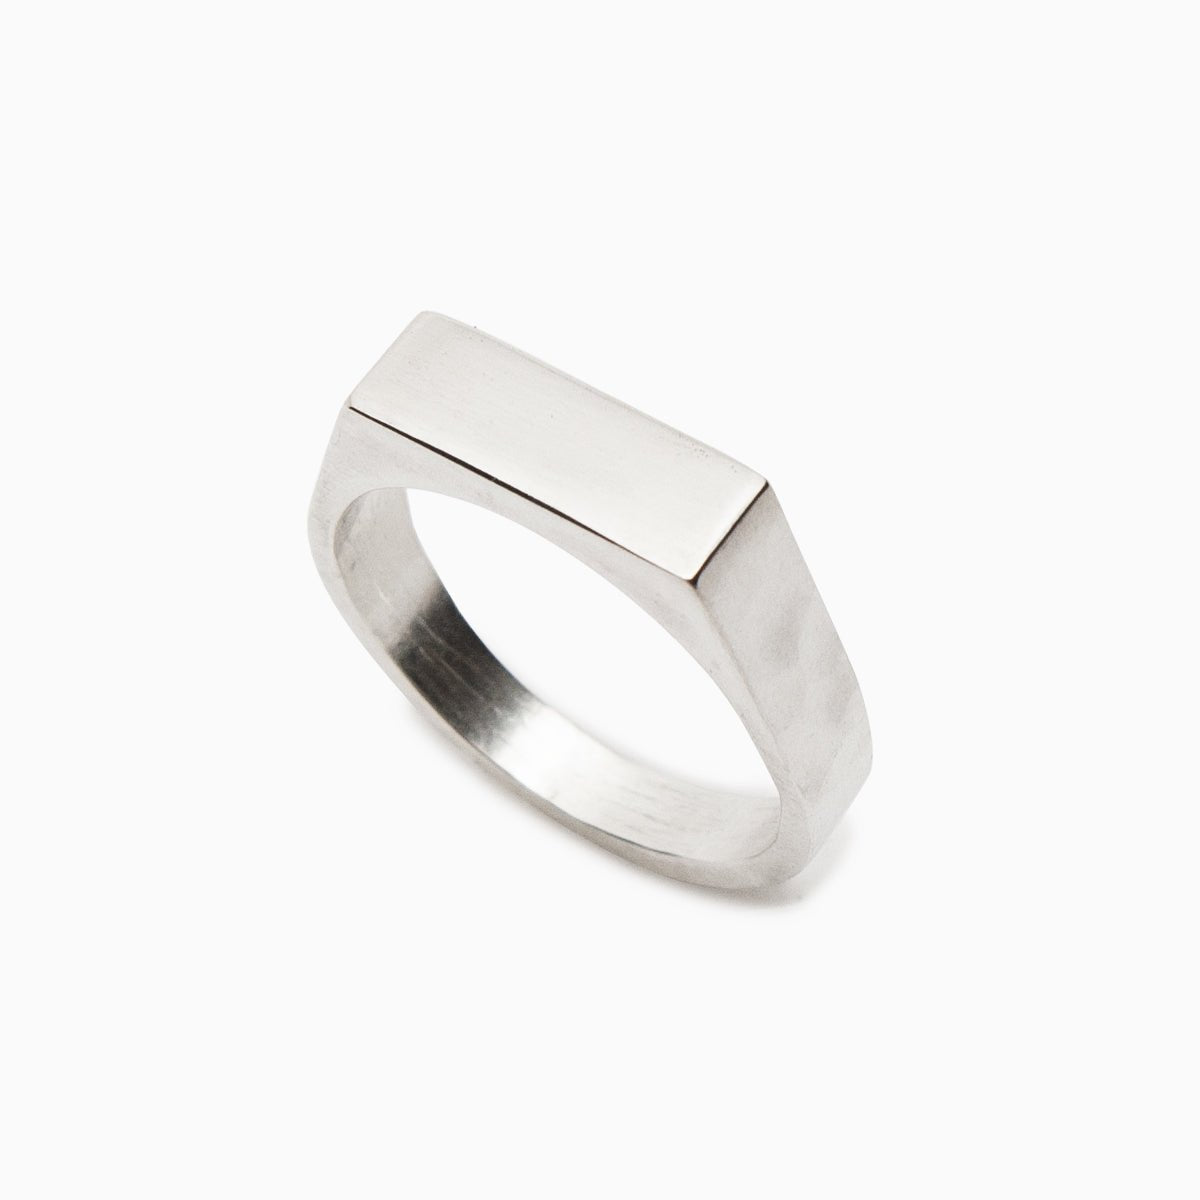  A narrow signet ring with a polished rectangular top and hammered detail on the band. Made in solid sterling silver. Designed and handcrafted in Portland, Oregon.